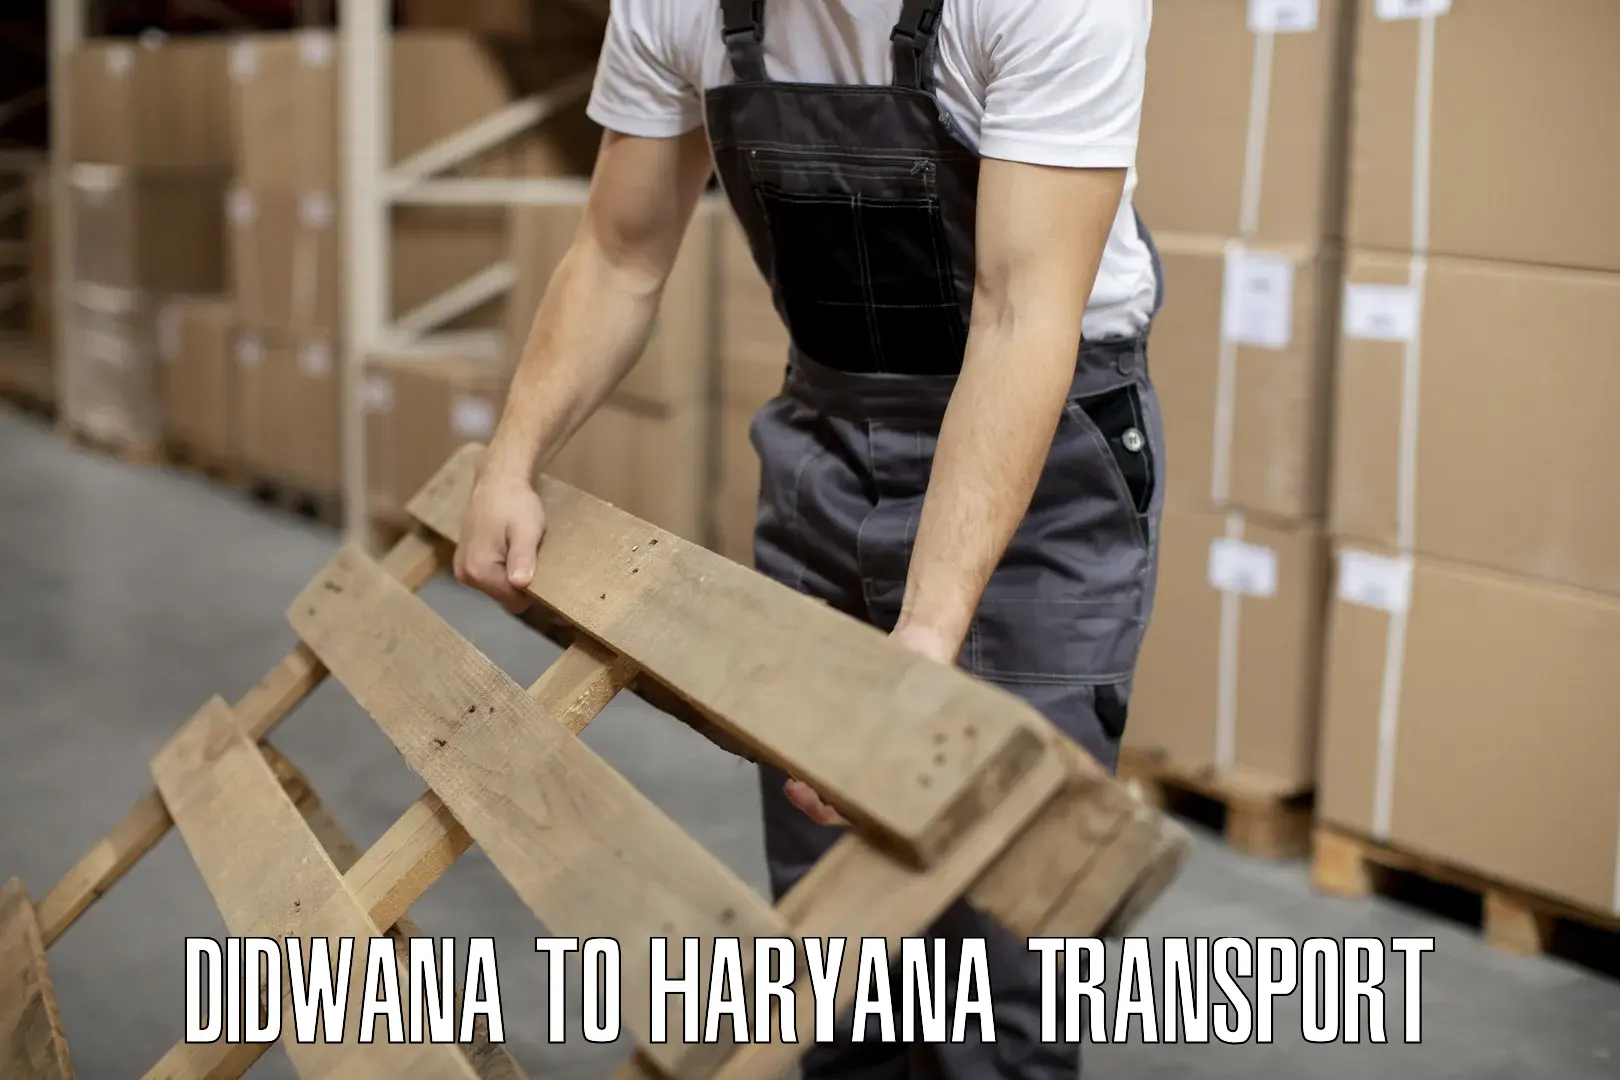 Part load transport service in India Didwana to Bilaspur Haryana